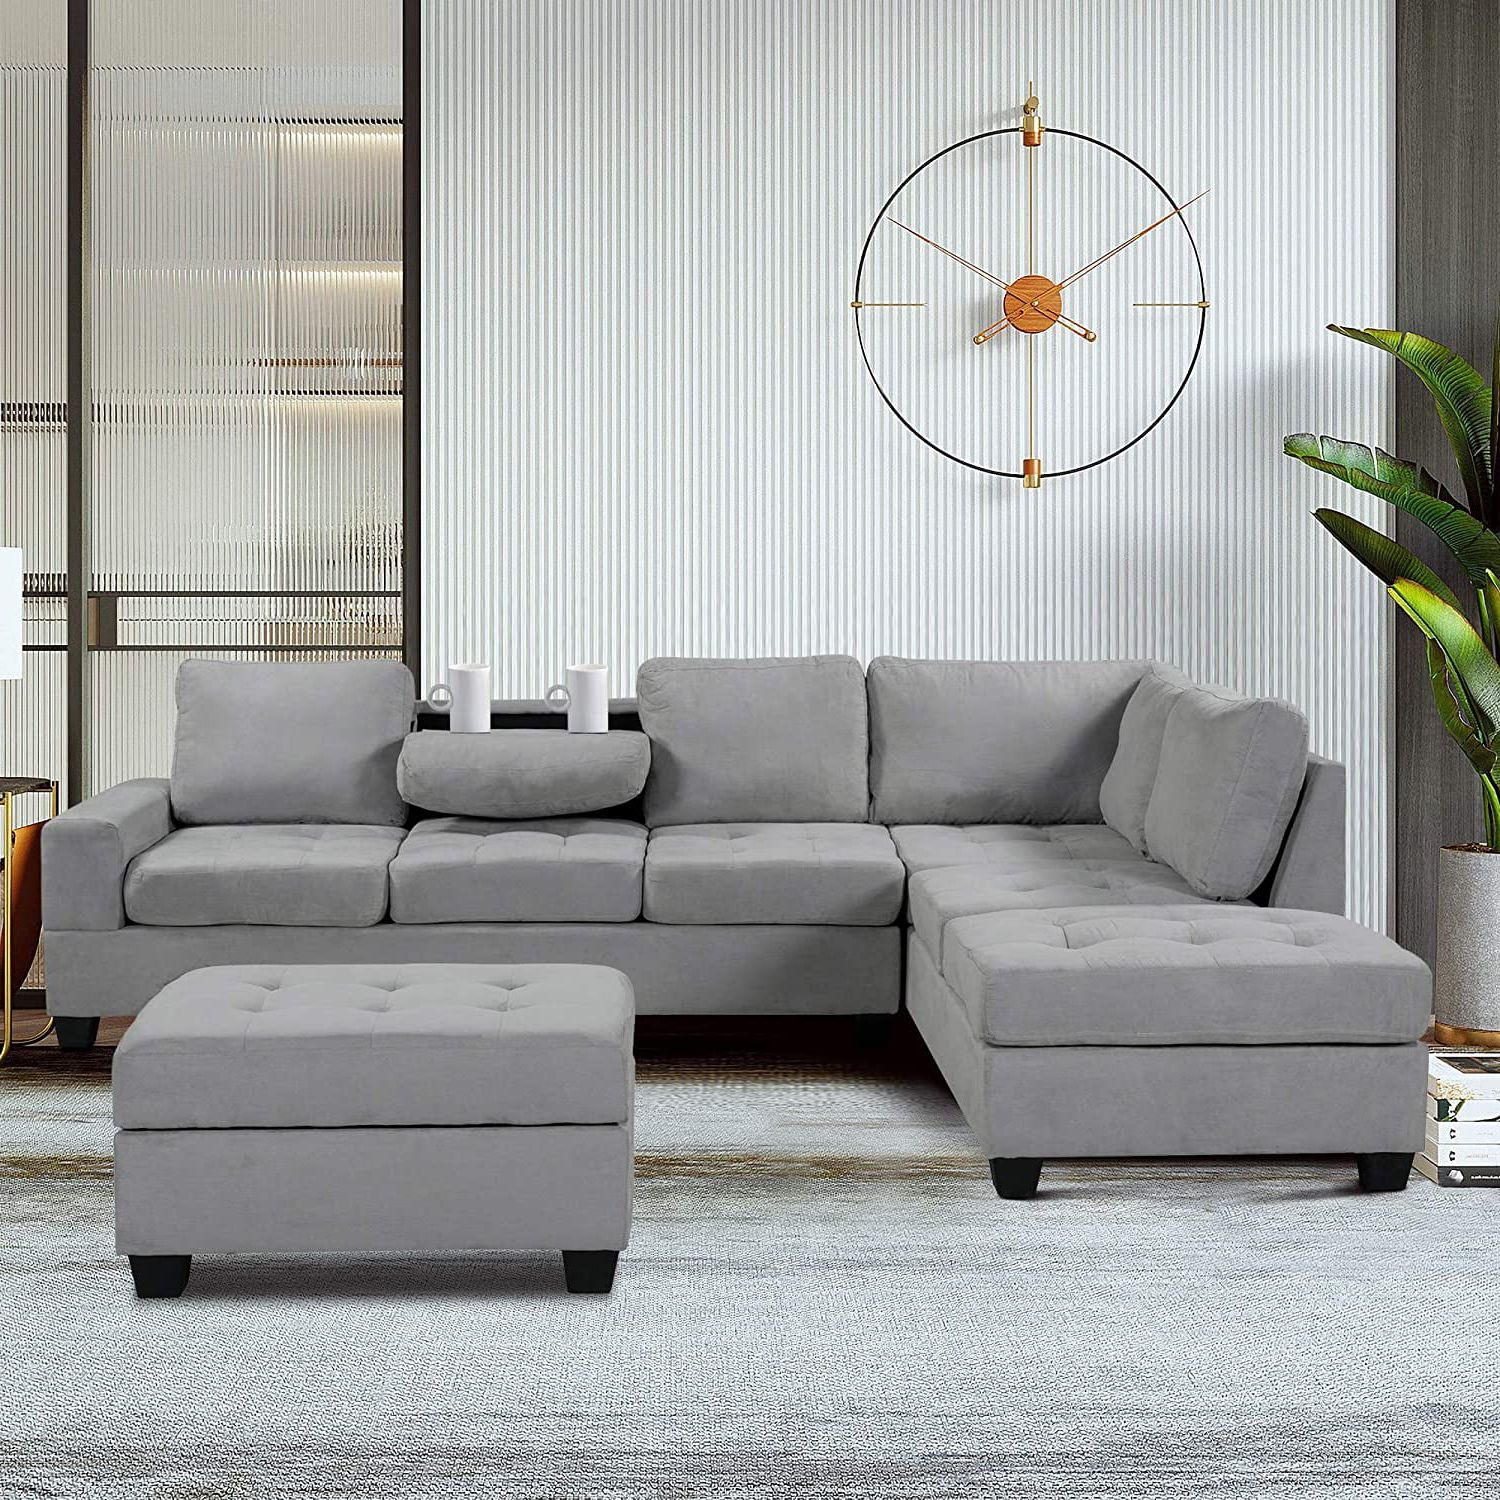 3 Piece Convertible Sectional Sofa L Shaped Couch With Reversible With Regard To 3 Seat Convertible Sectional Sofas (View 8 of 20)